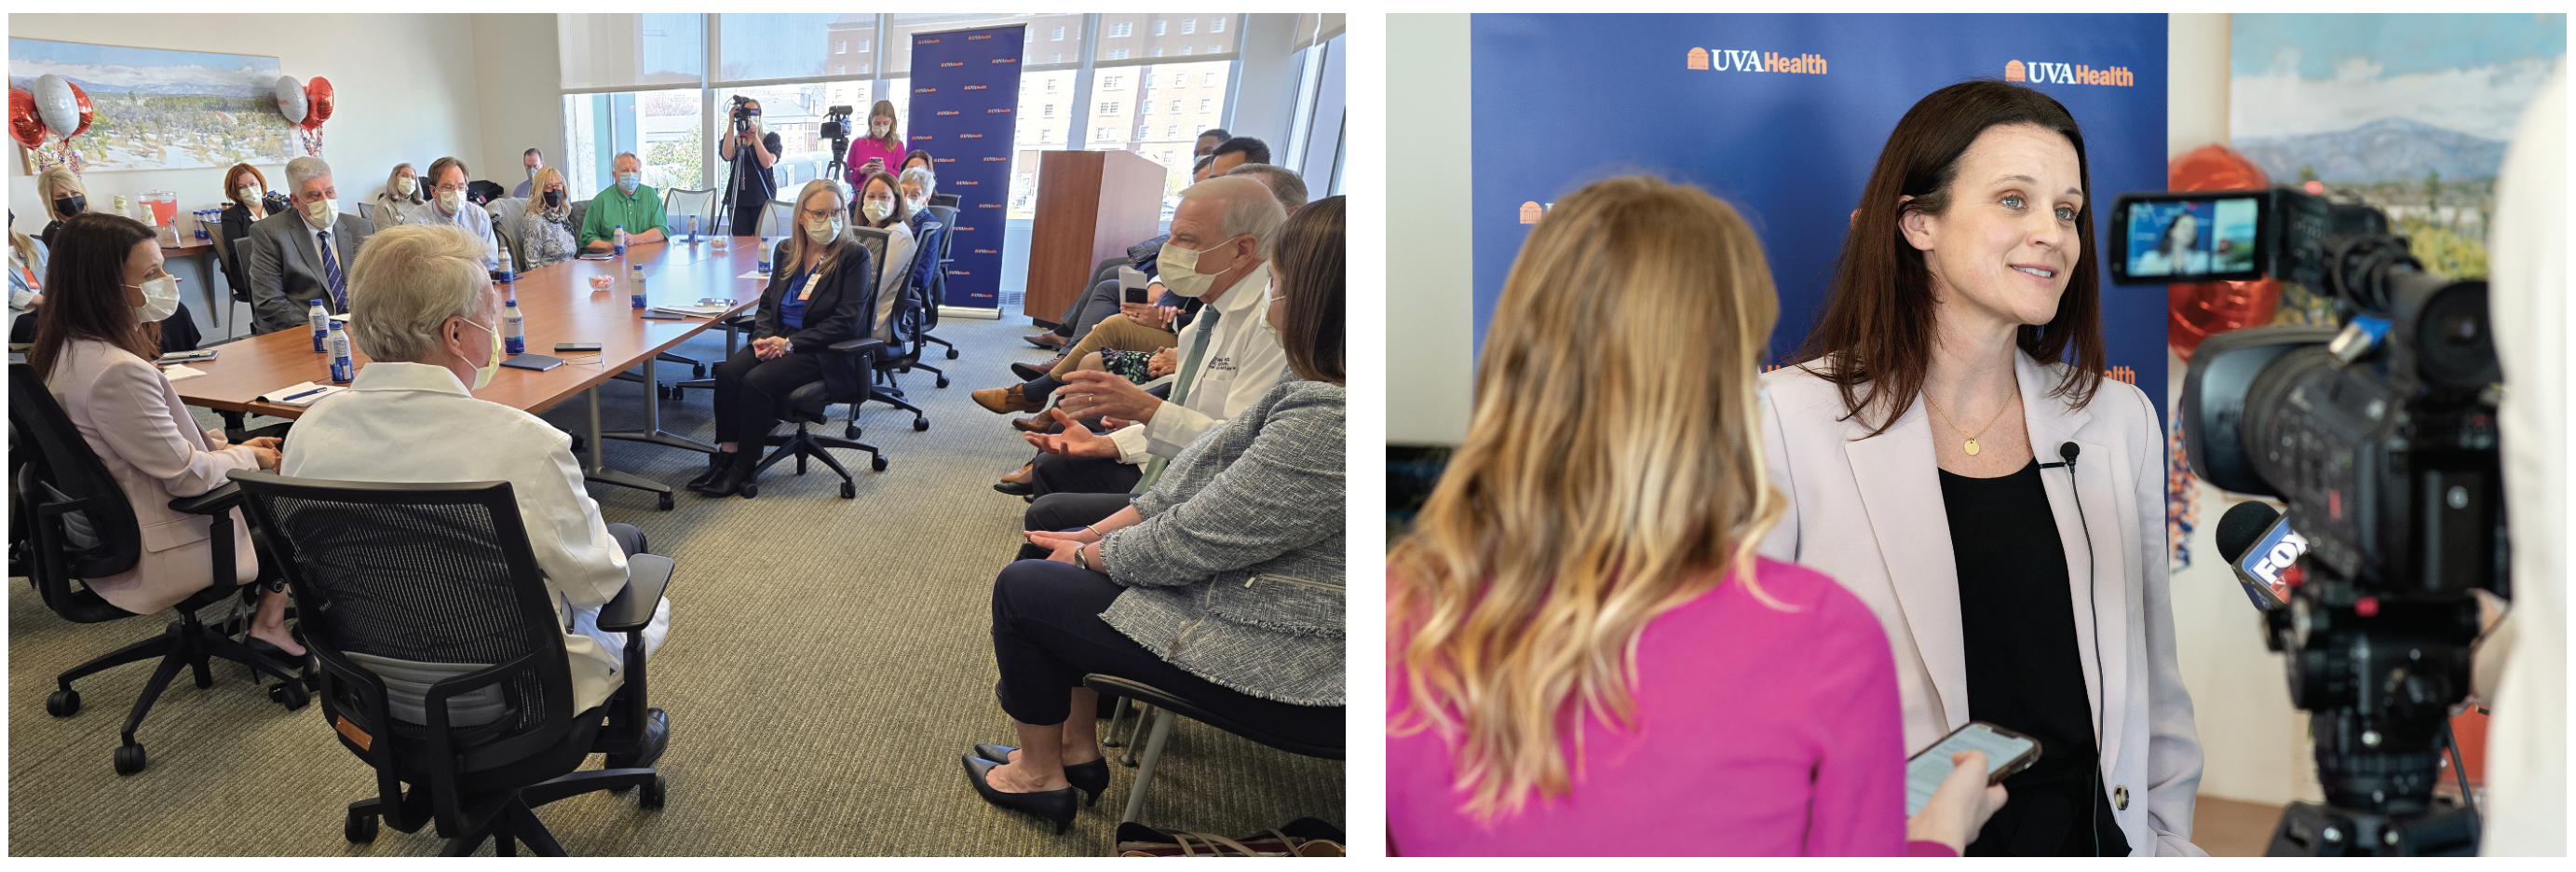 Danielle Carnival, PhD, deputy assistant to President Biden for his administration’s Cancer Moonshot program, met with cancer physicians, nurses, and patients at UVA Health during her visit.